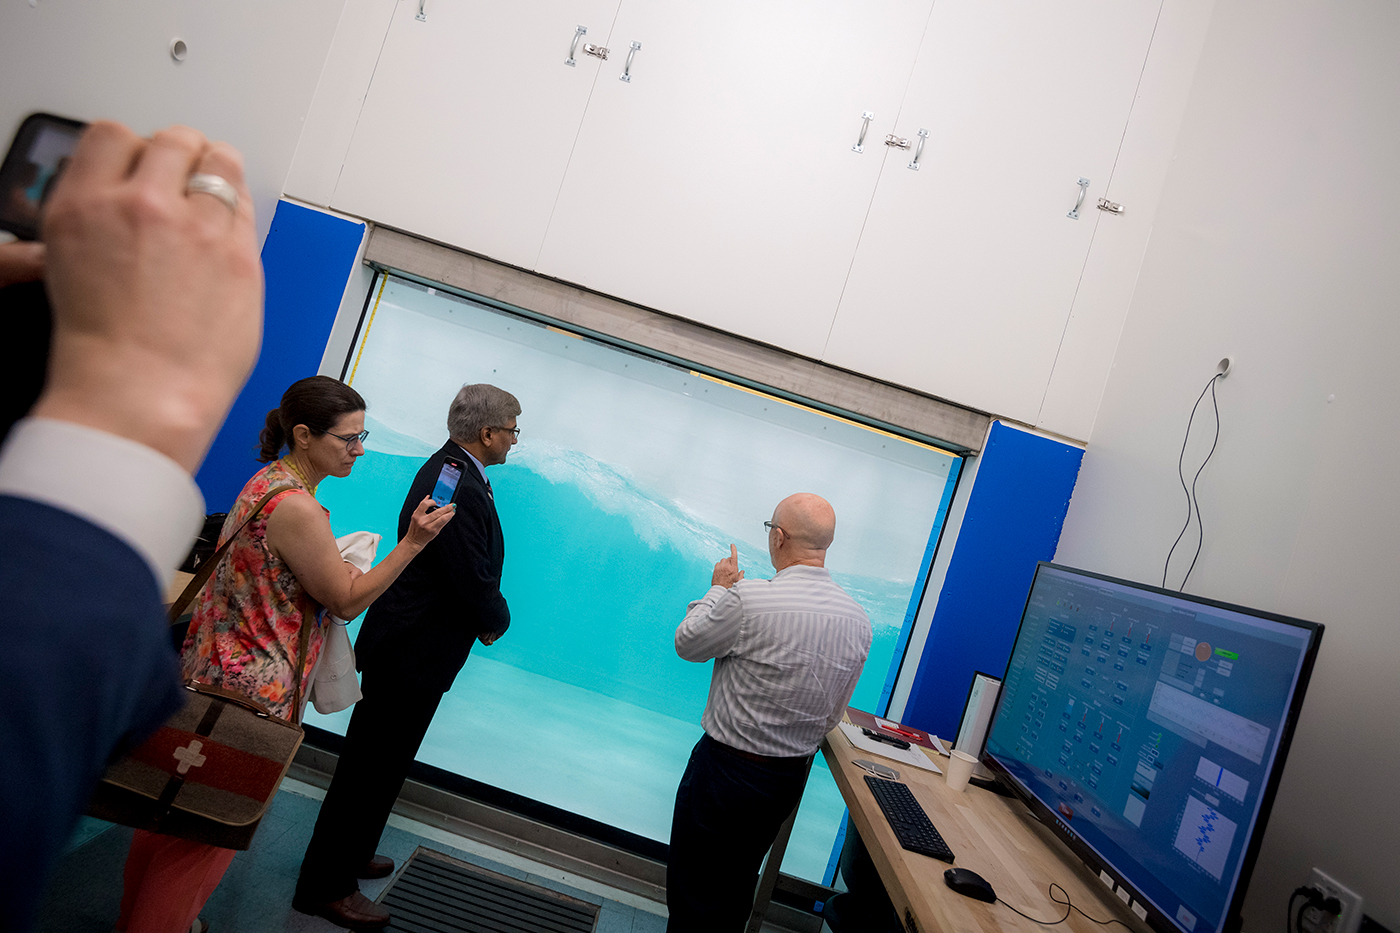 NSF Director Panchanathan gets a close-up demonstration of the new Scripps Ocean-Atmosphere Research Simulator funded largely with NSF support.